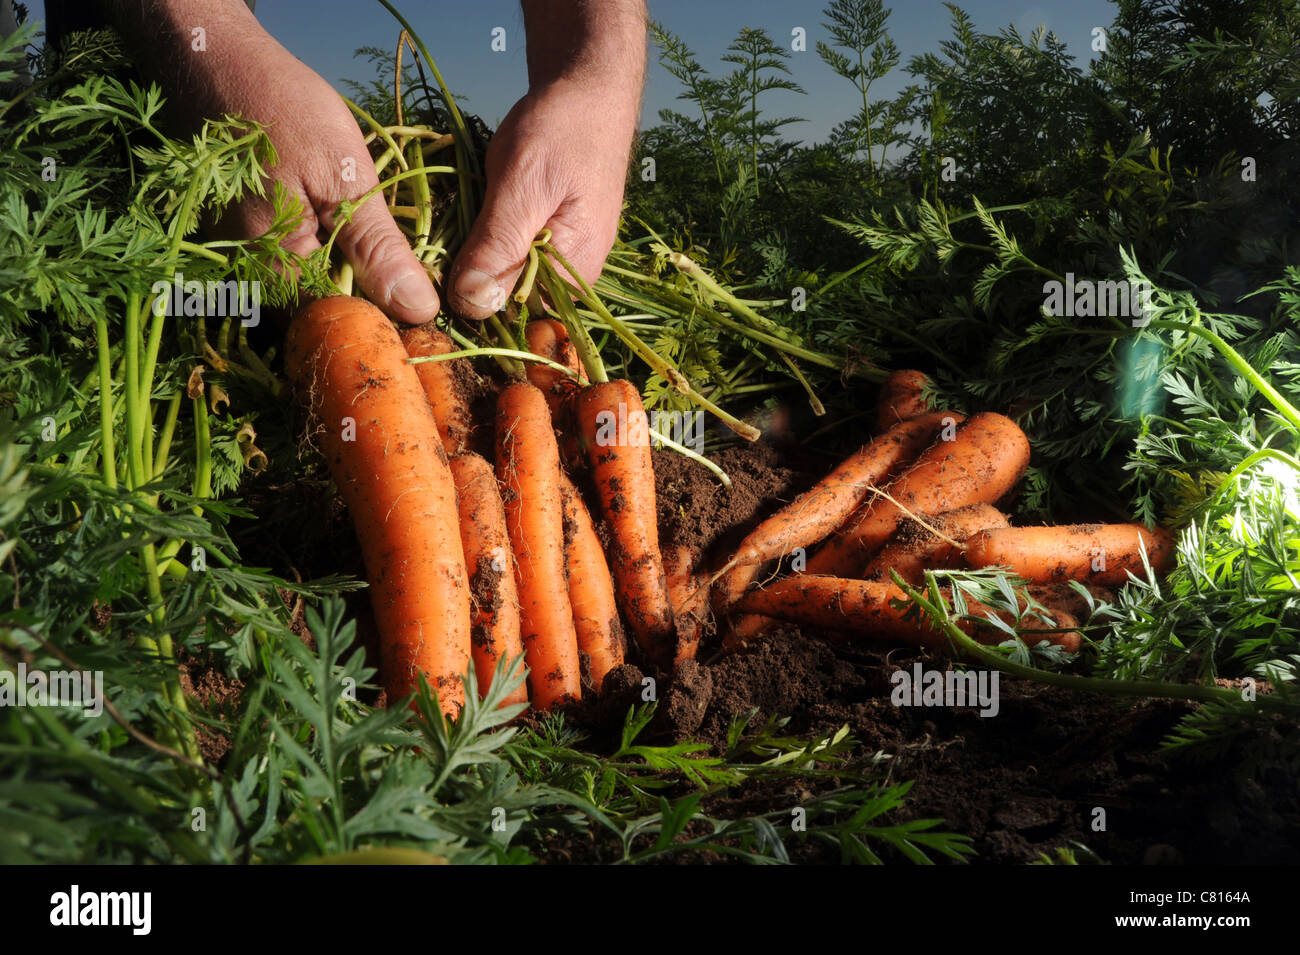 CARROTS BEING HARVESTED PULLED FROM FIELDS BY MANS HANDS RE FARMING CROPS GROWING VEGETABLES HEALTHY EATING GROWING YOUR OWN UK Stock Photo